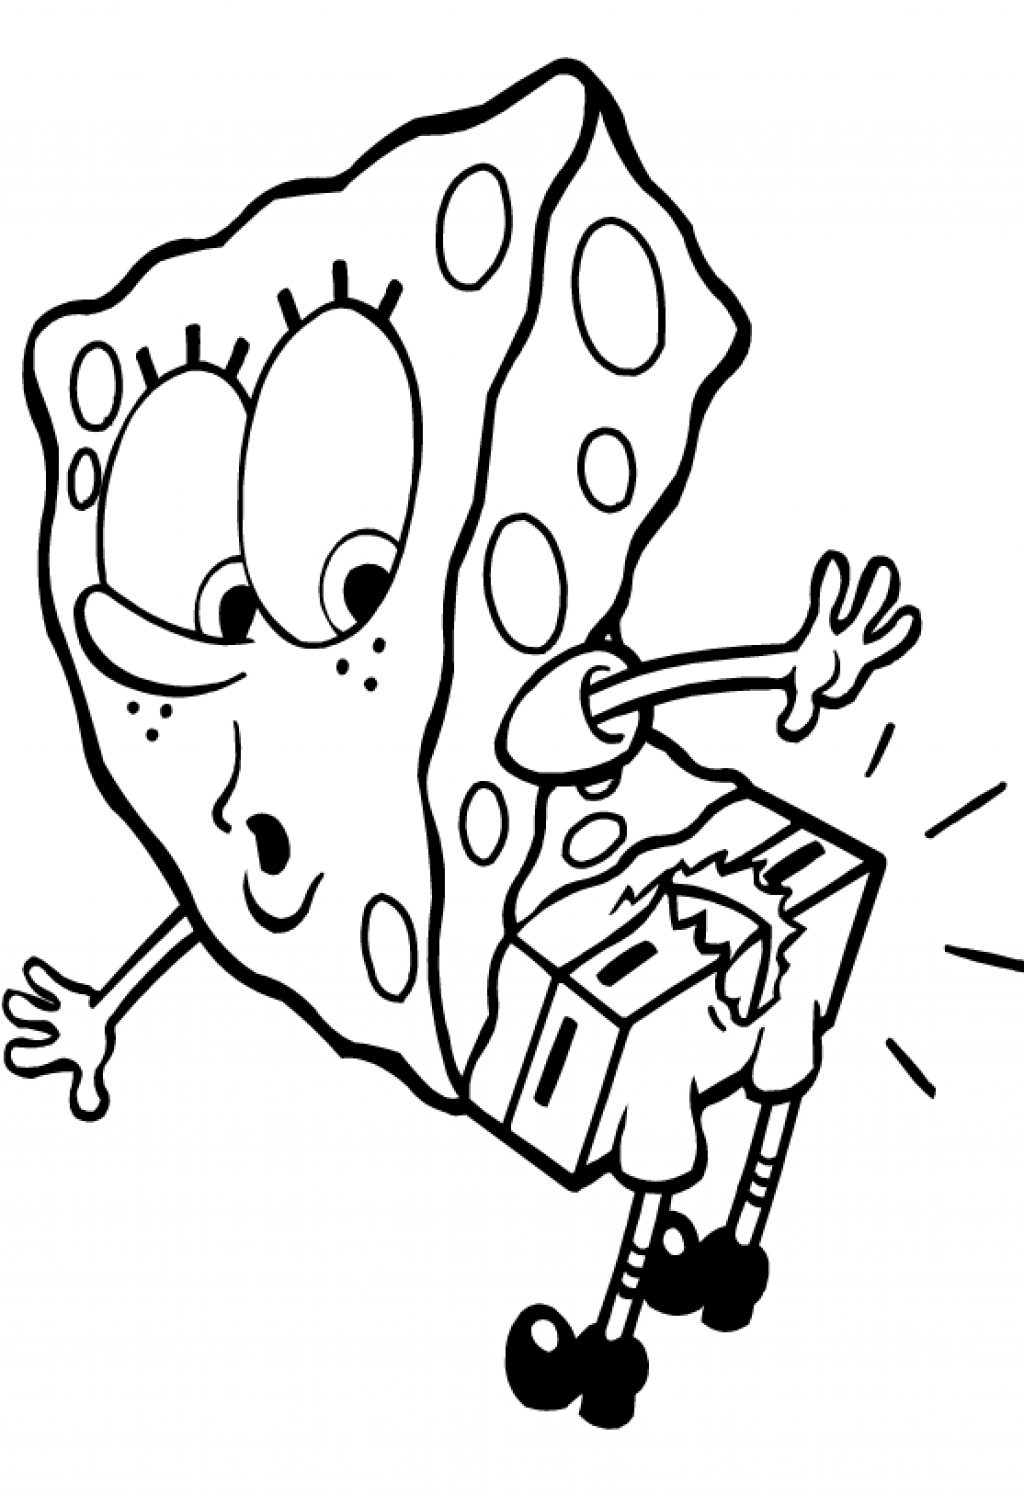 spongebob and gary coloring page | Only Coloring Pages